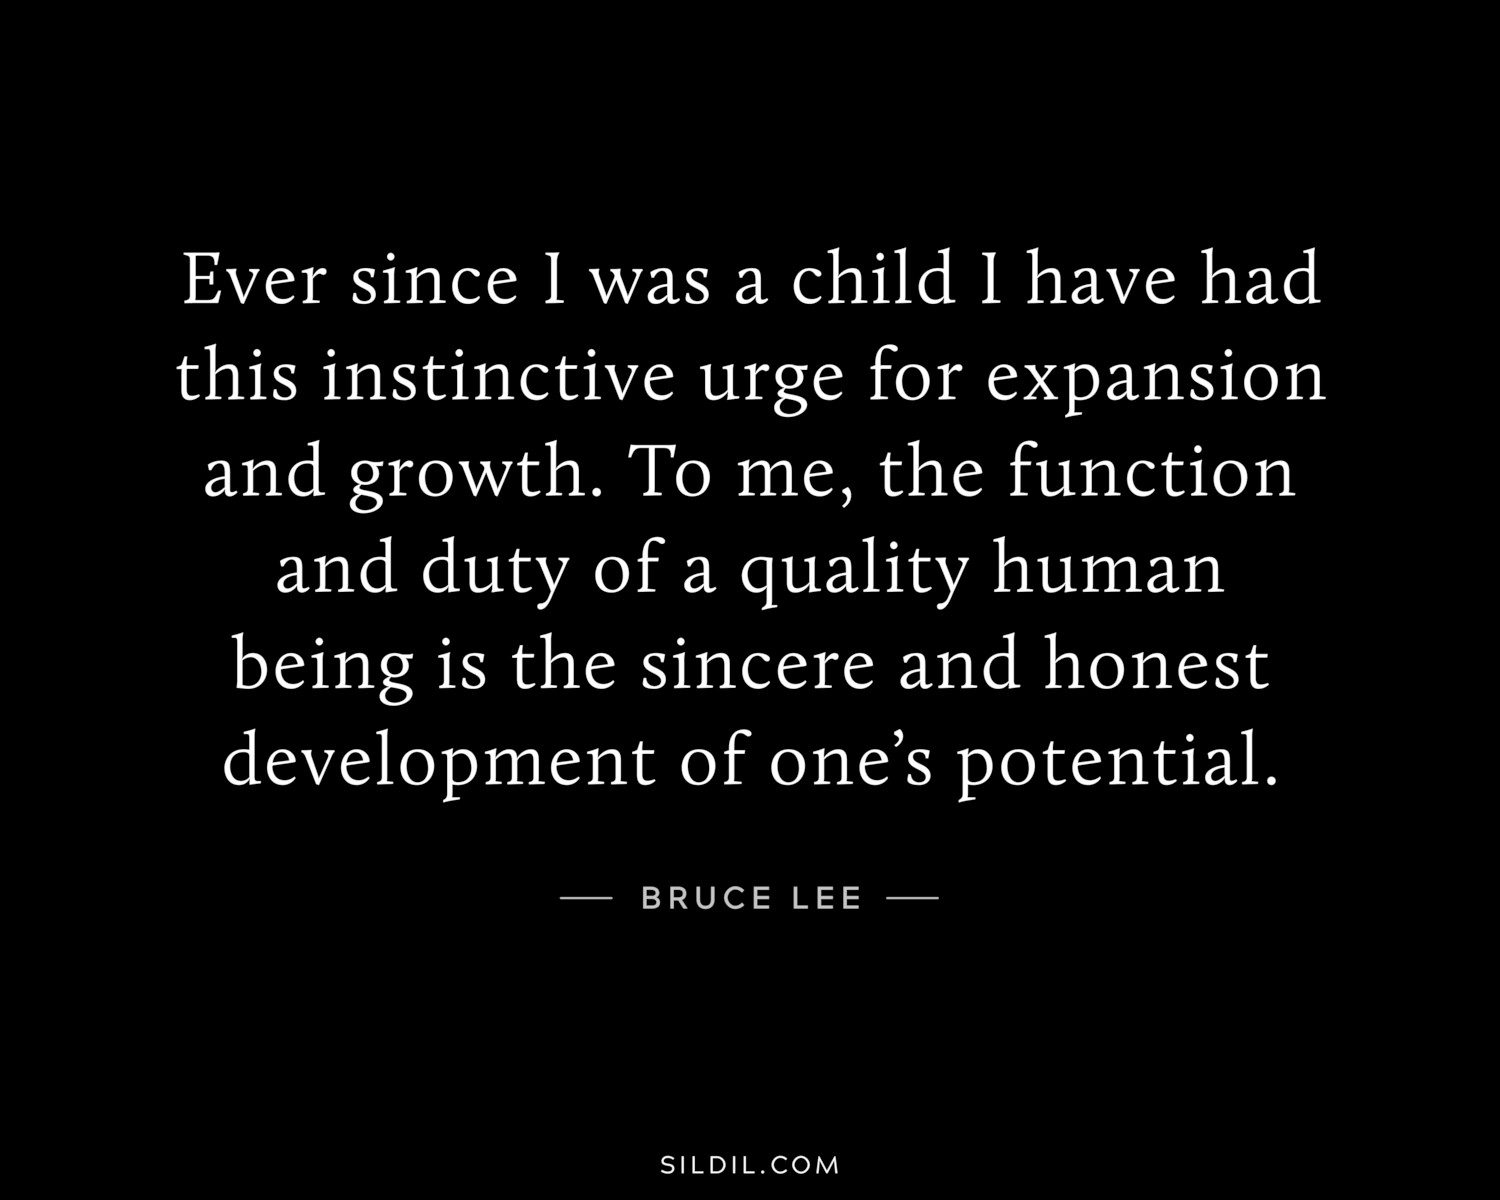 Ever since I was a child I have had this instinctive urge for expansion and growth. To me, the function and duty of a quality human being is the sincere and honest development of one’s potential.